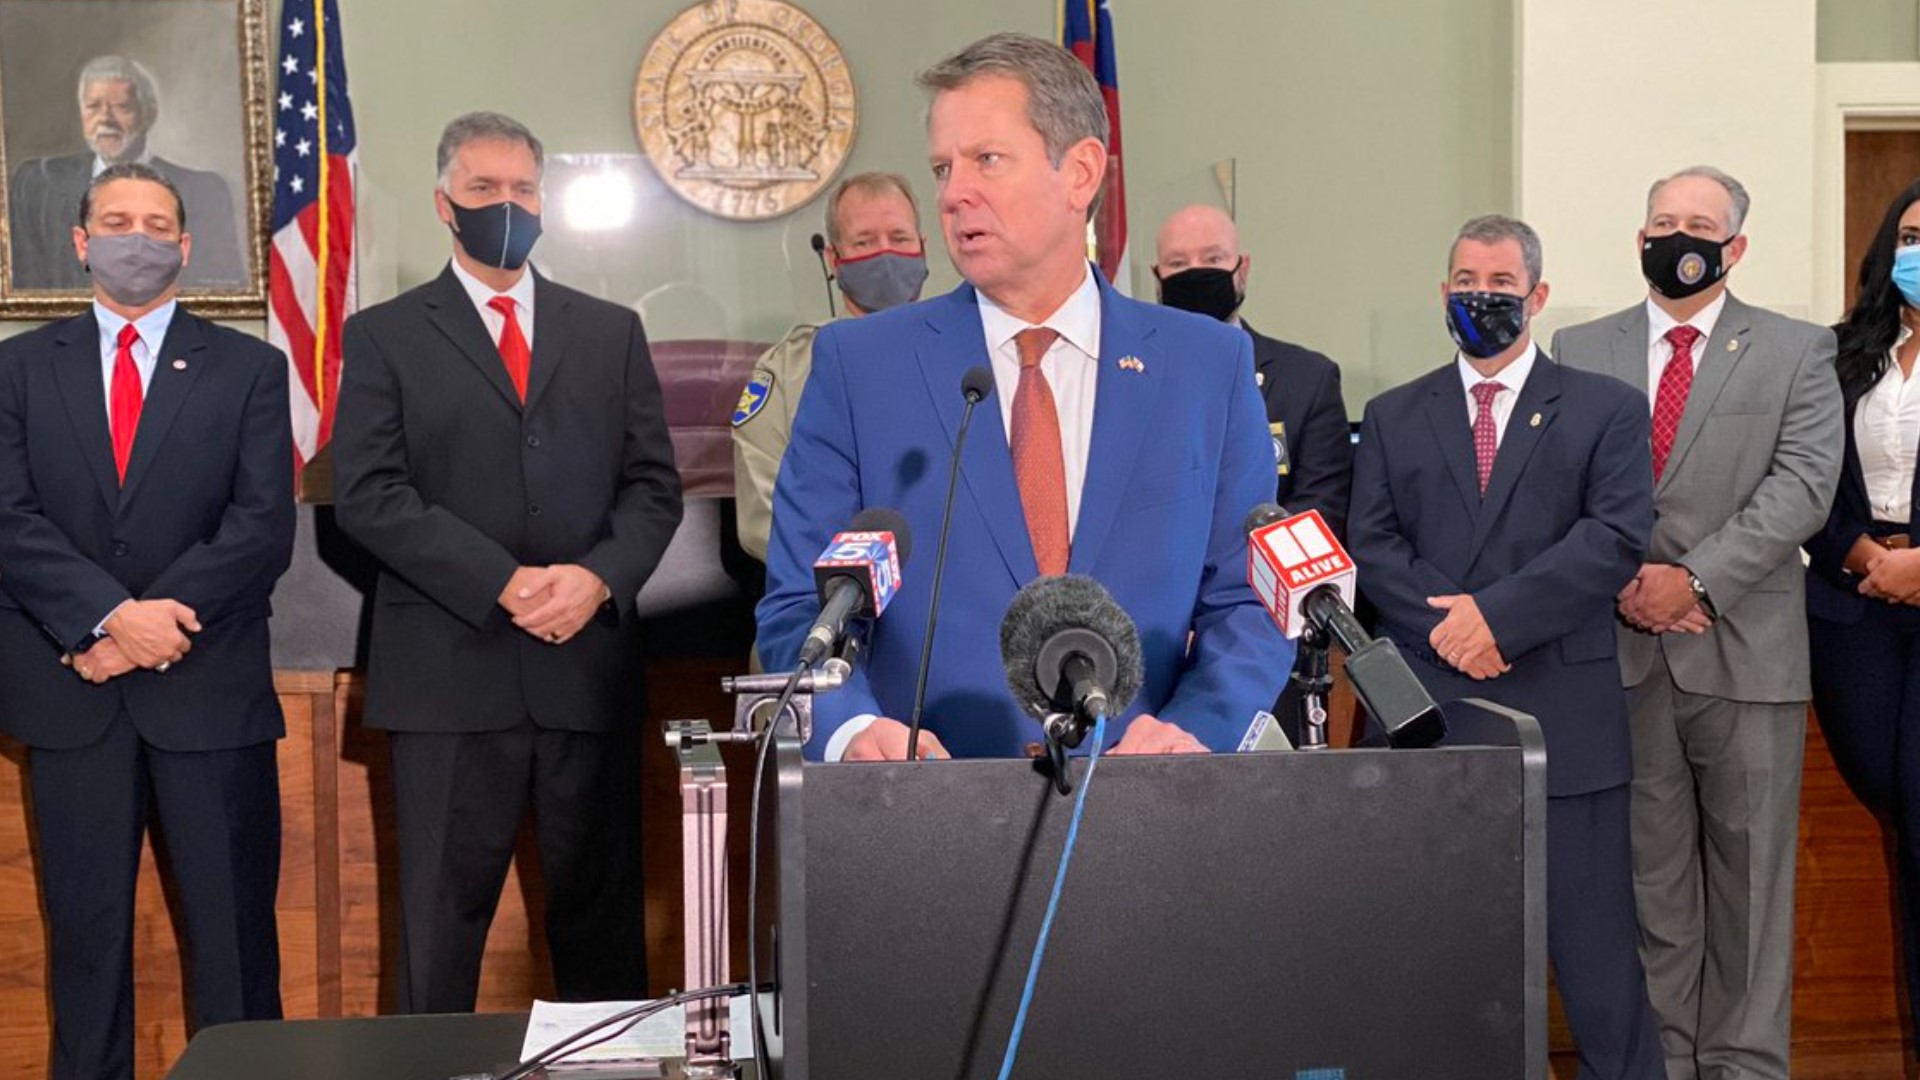 "My message to gang members looking to prey on innocent Georgians, commit crimes, and destroy lives is simple: we will not stop until every community is safe."